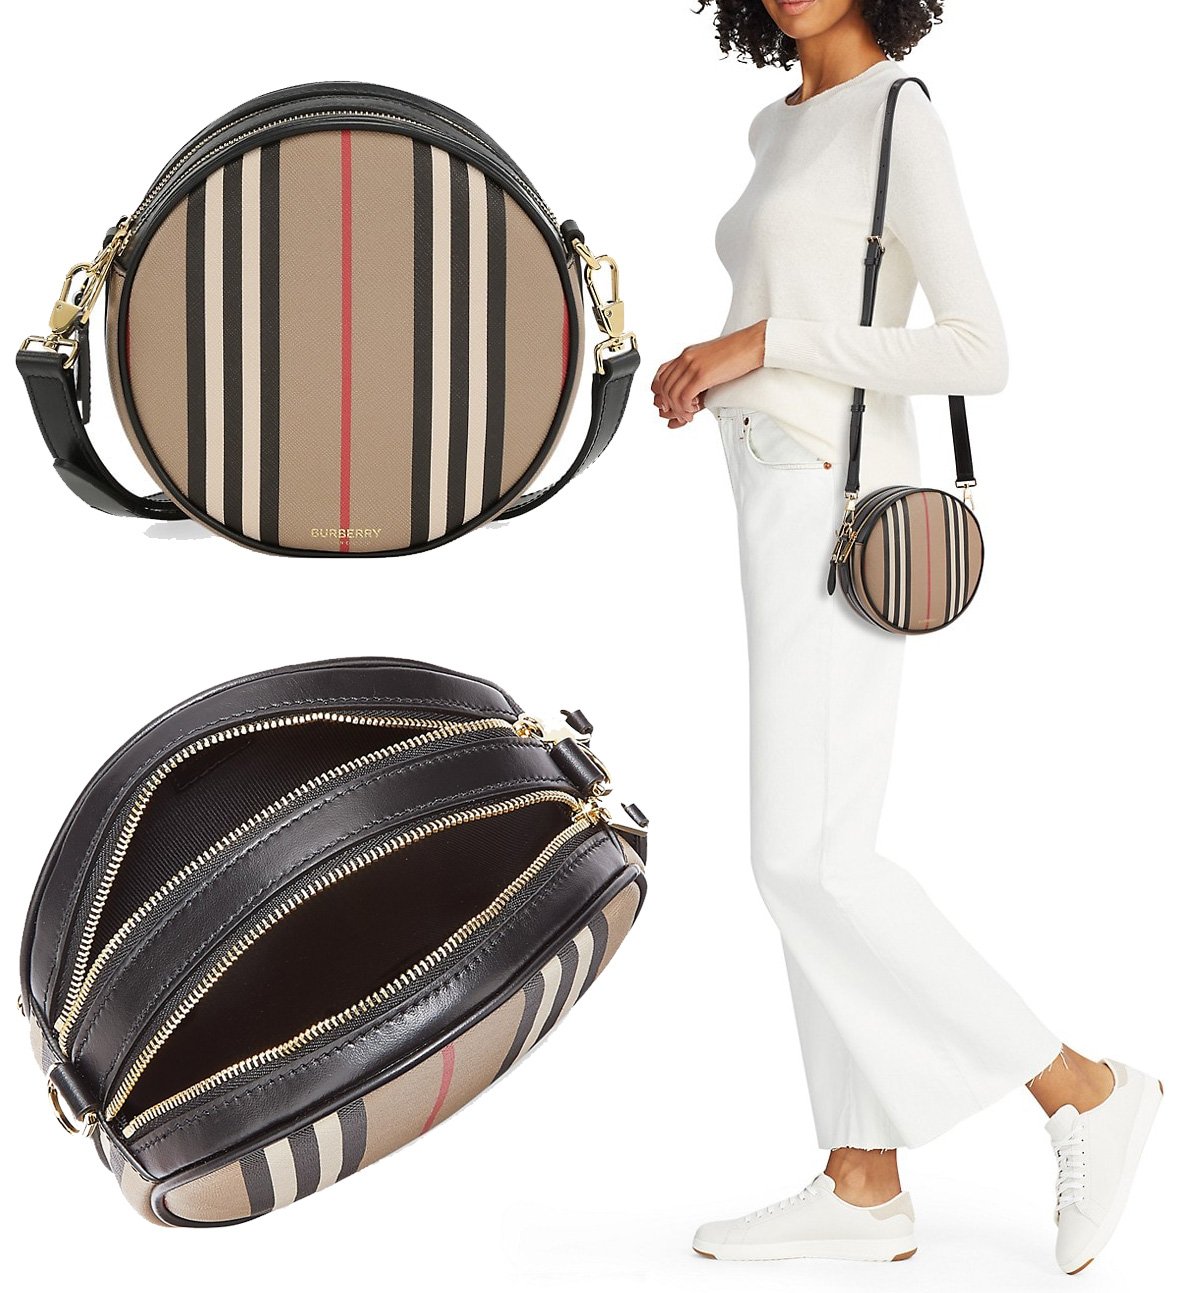 A circular purse that has Burberry's signature stripe and an adjustable convertible strap that can be worn across the body or around the waist